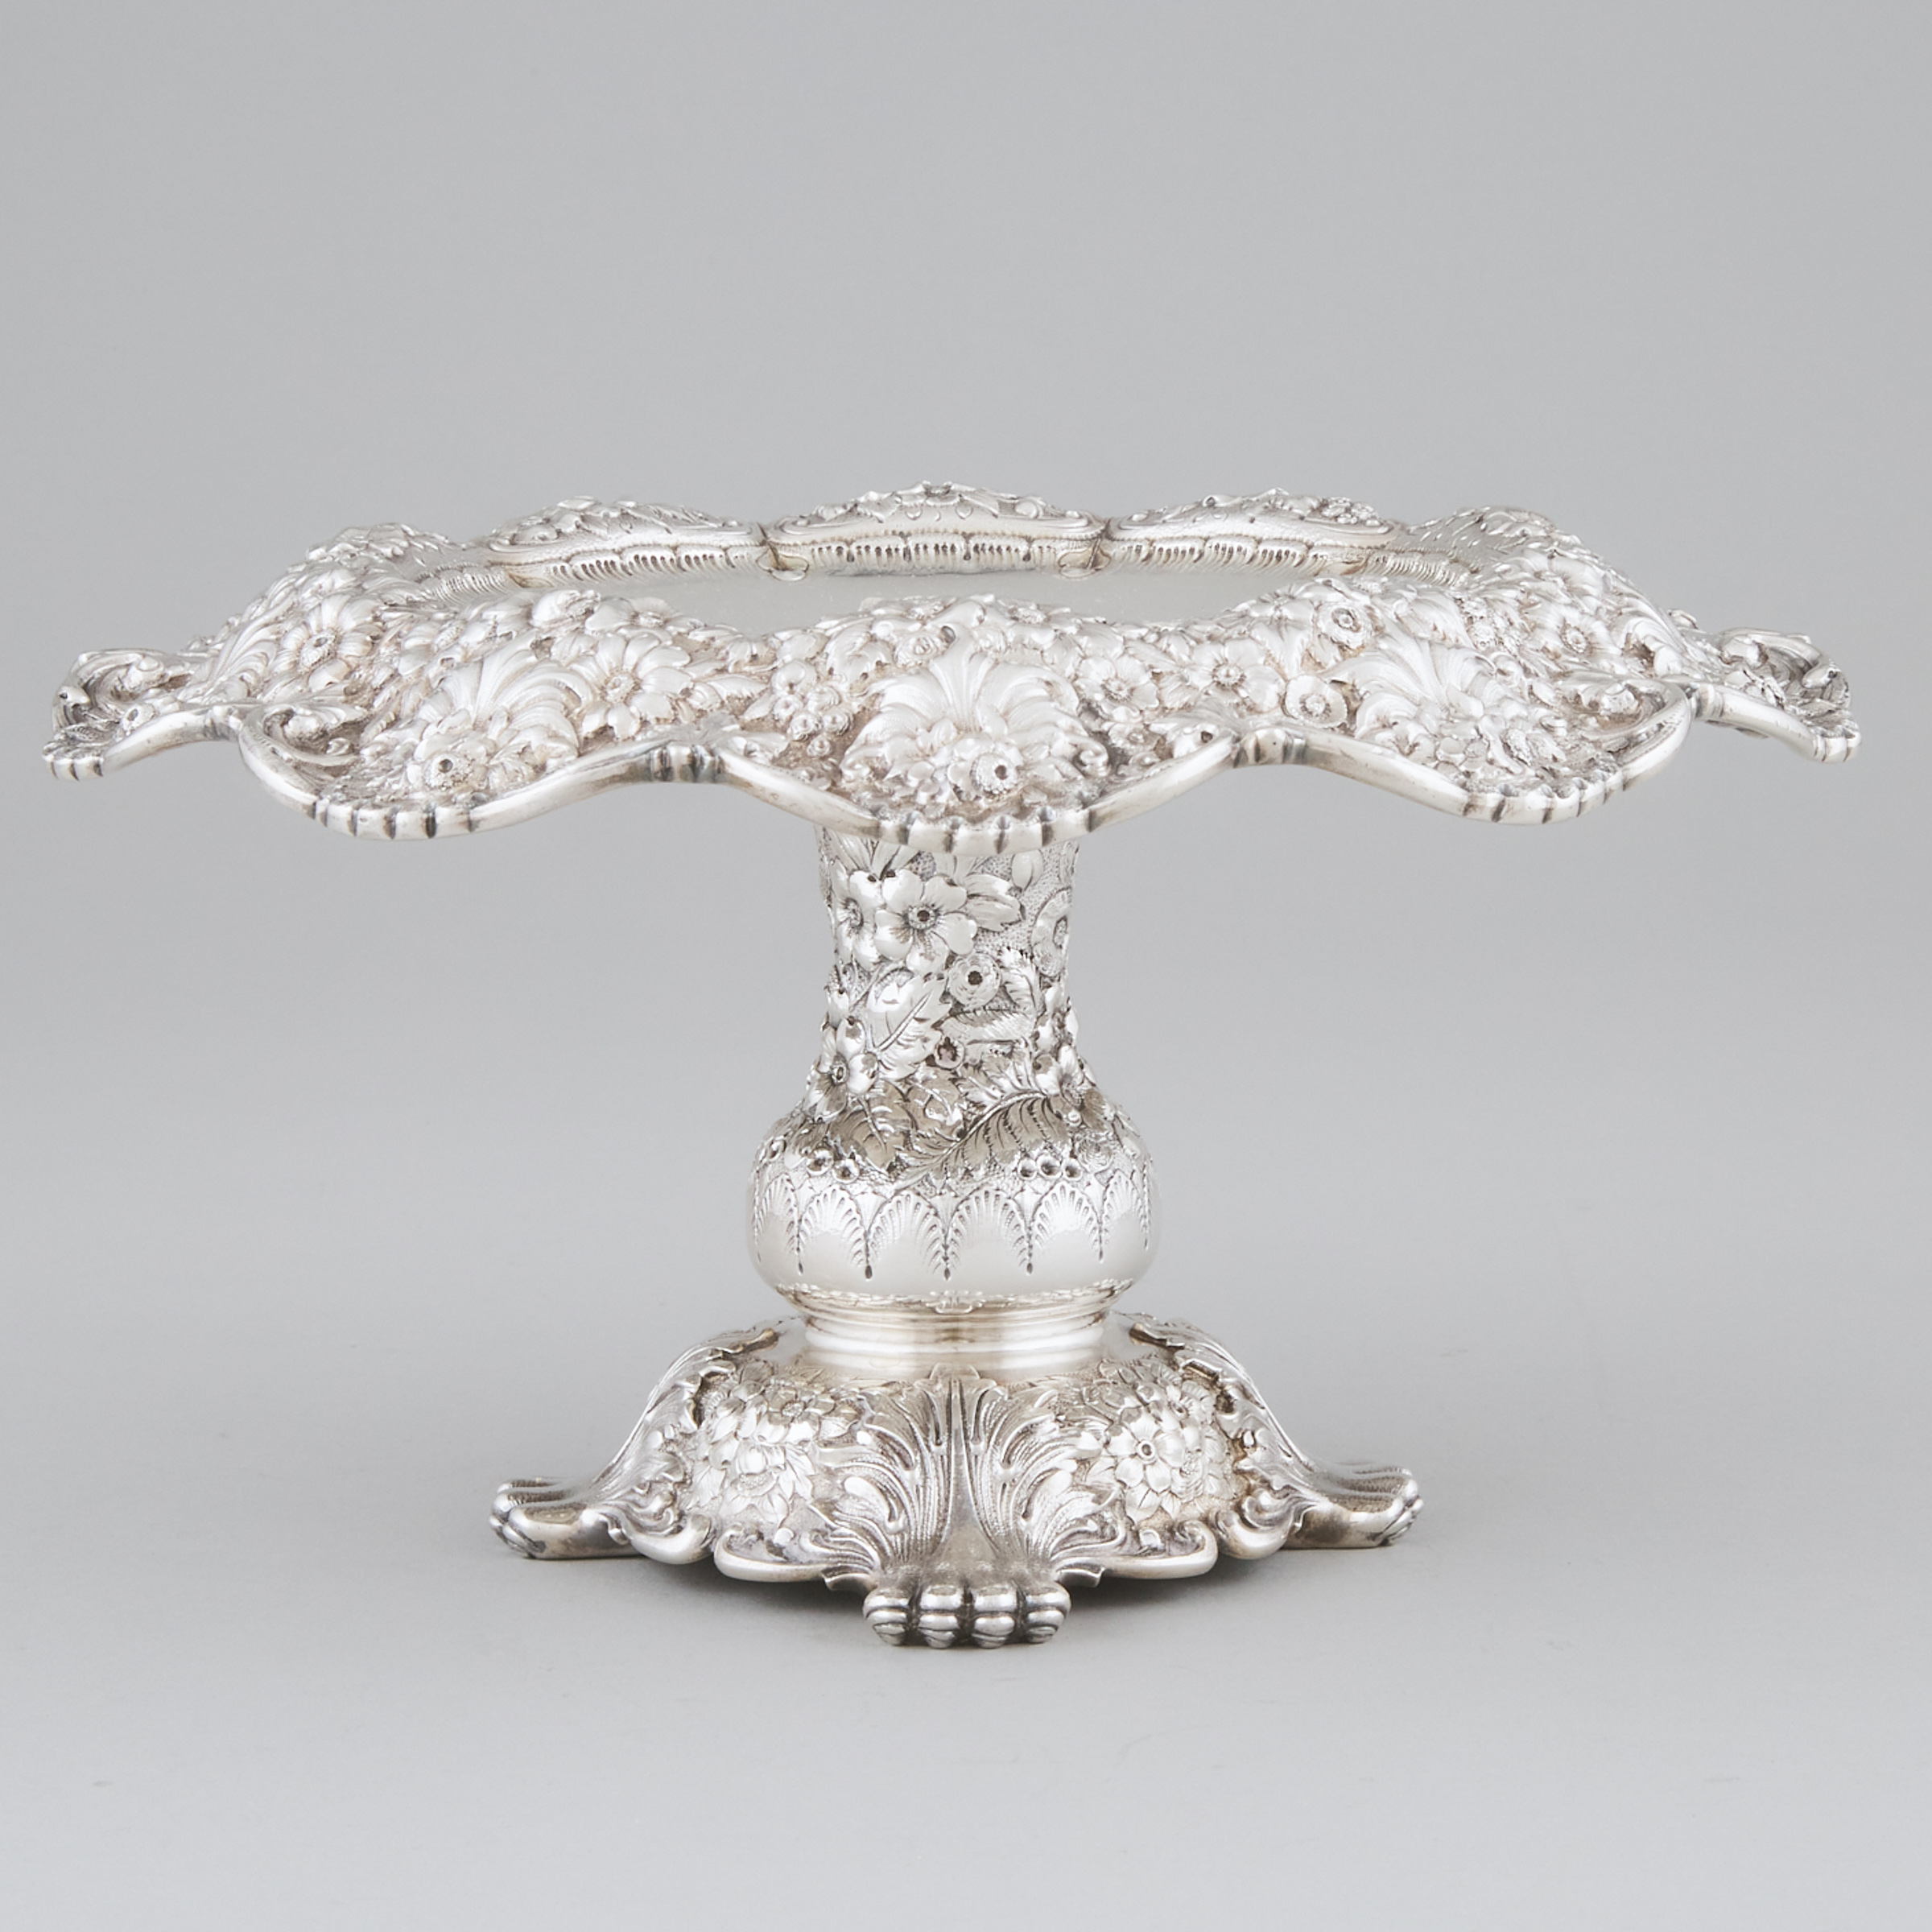 American Silver Repoussé Pedestal Footed Comport, Tiffany & Co., New York, N.Y., c.1875-91